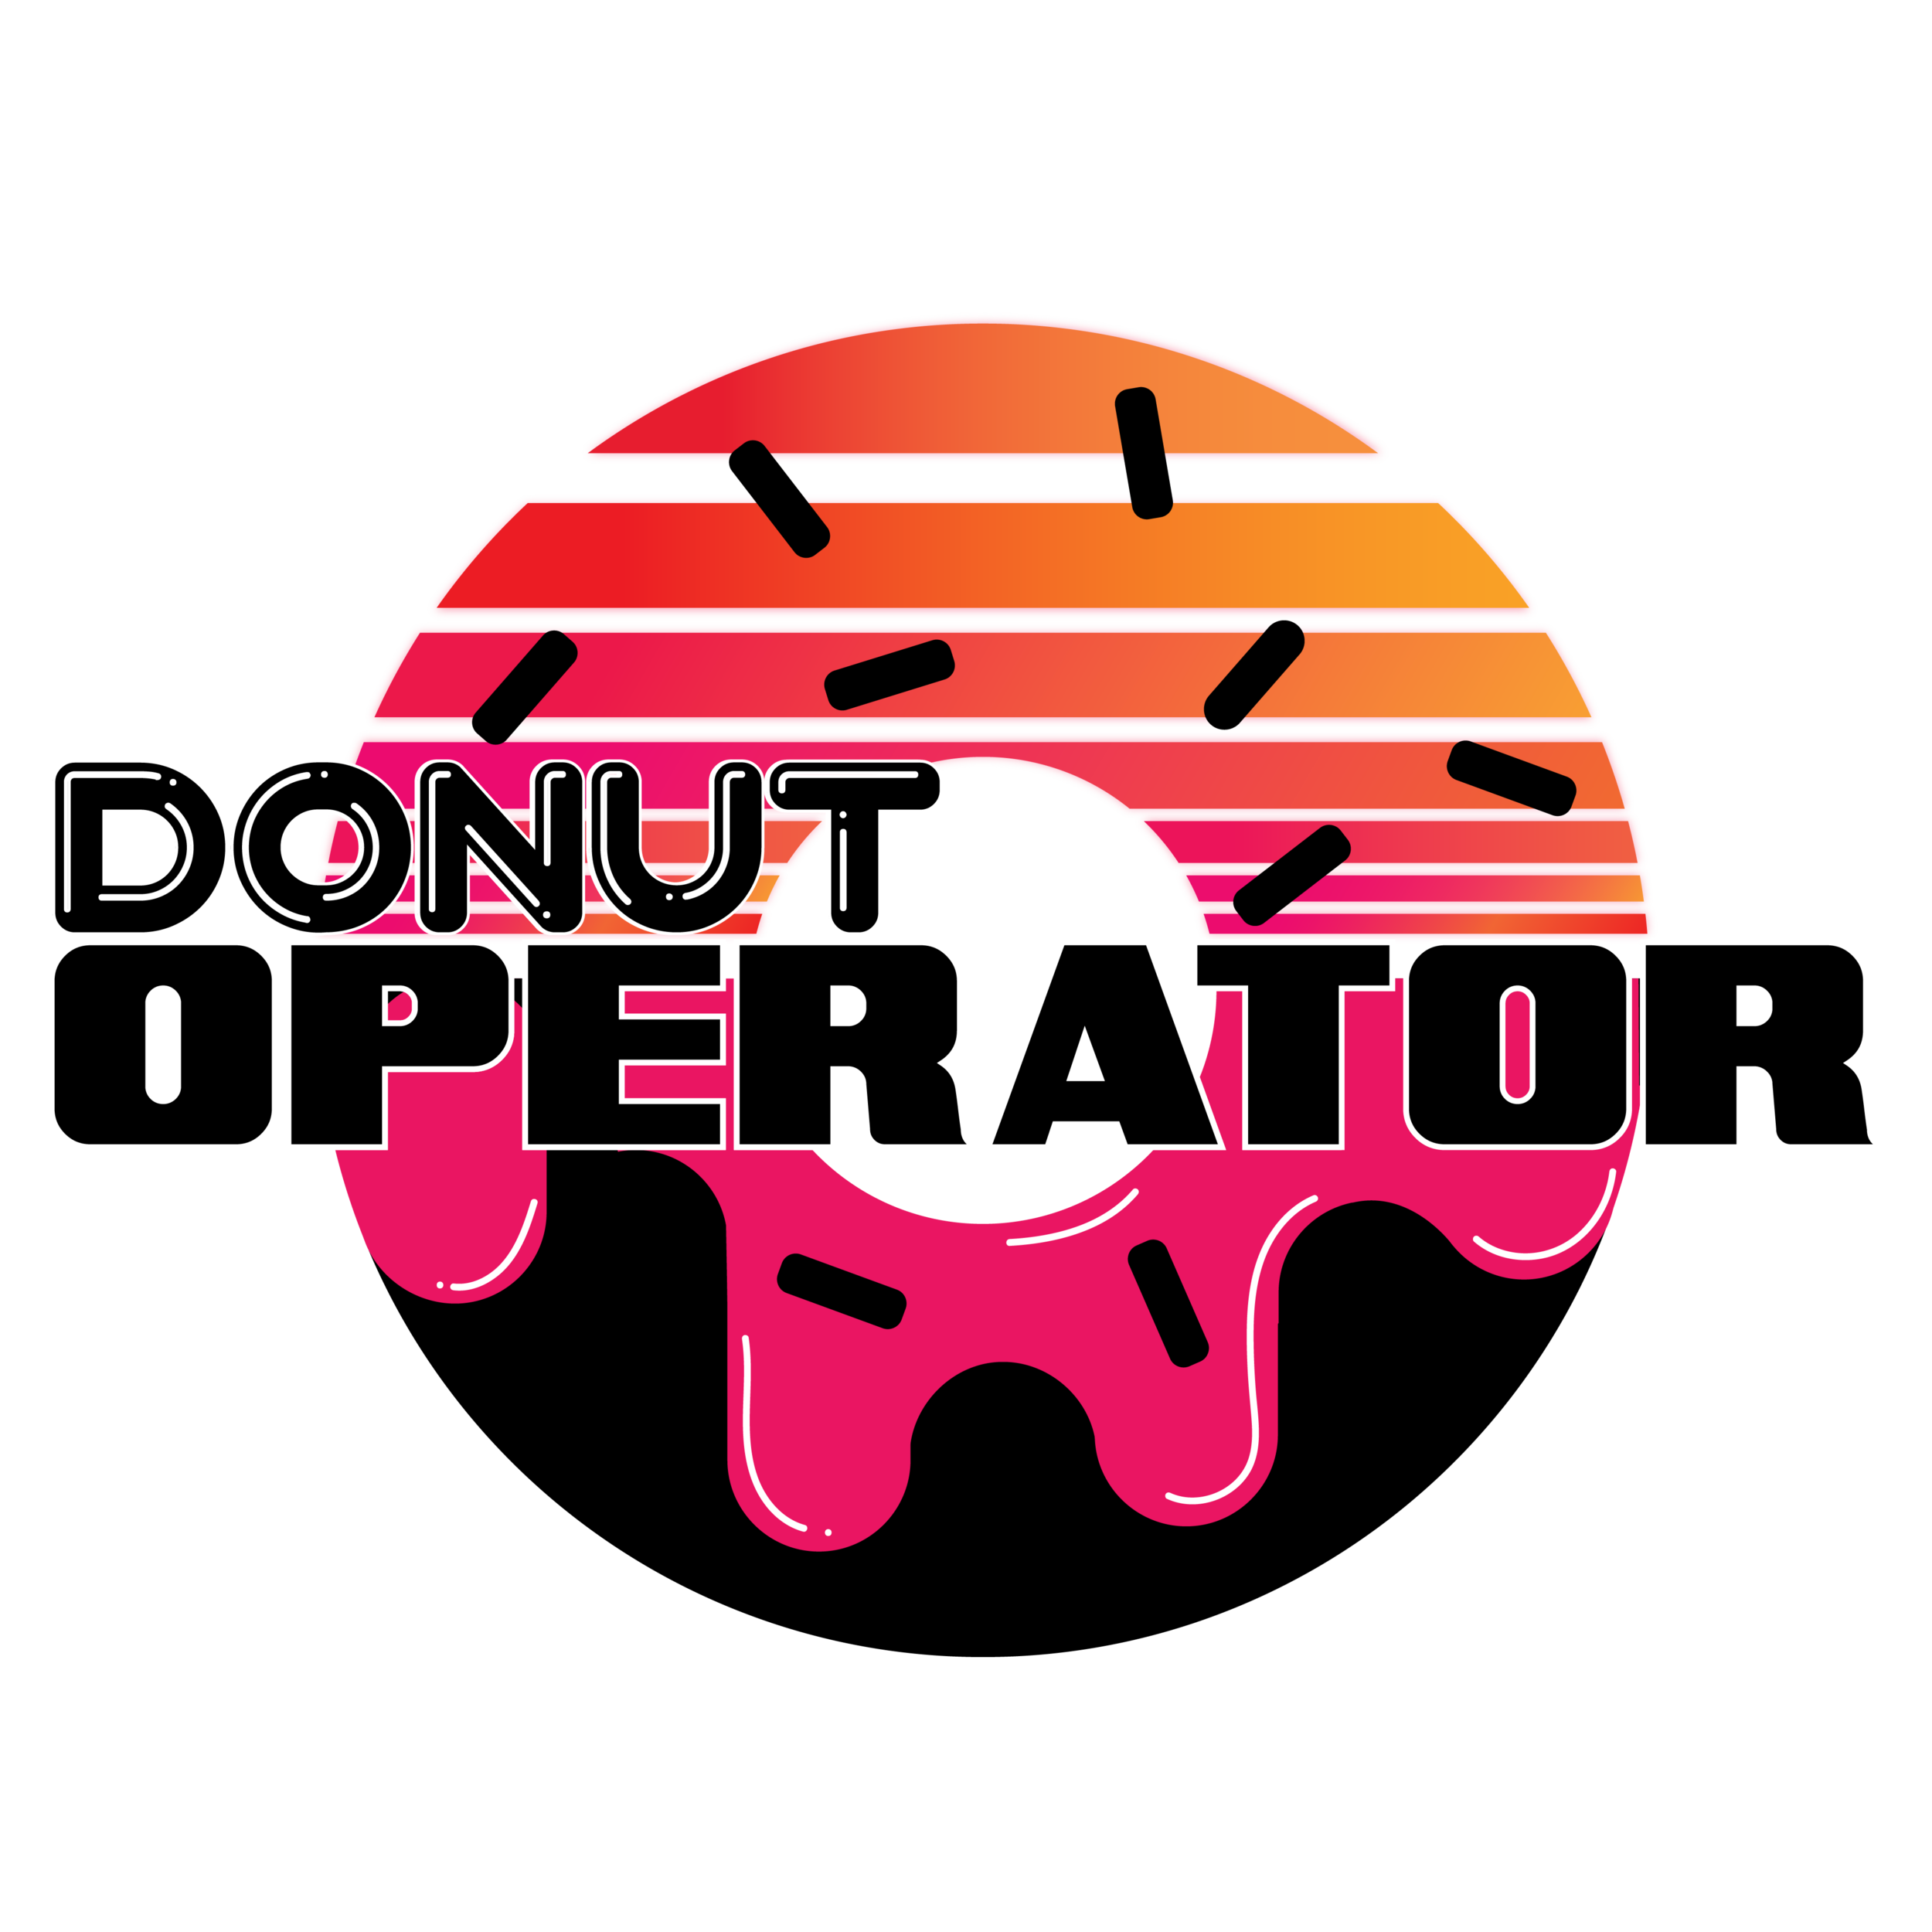 Is donut operator who 